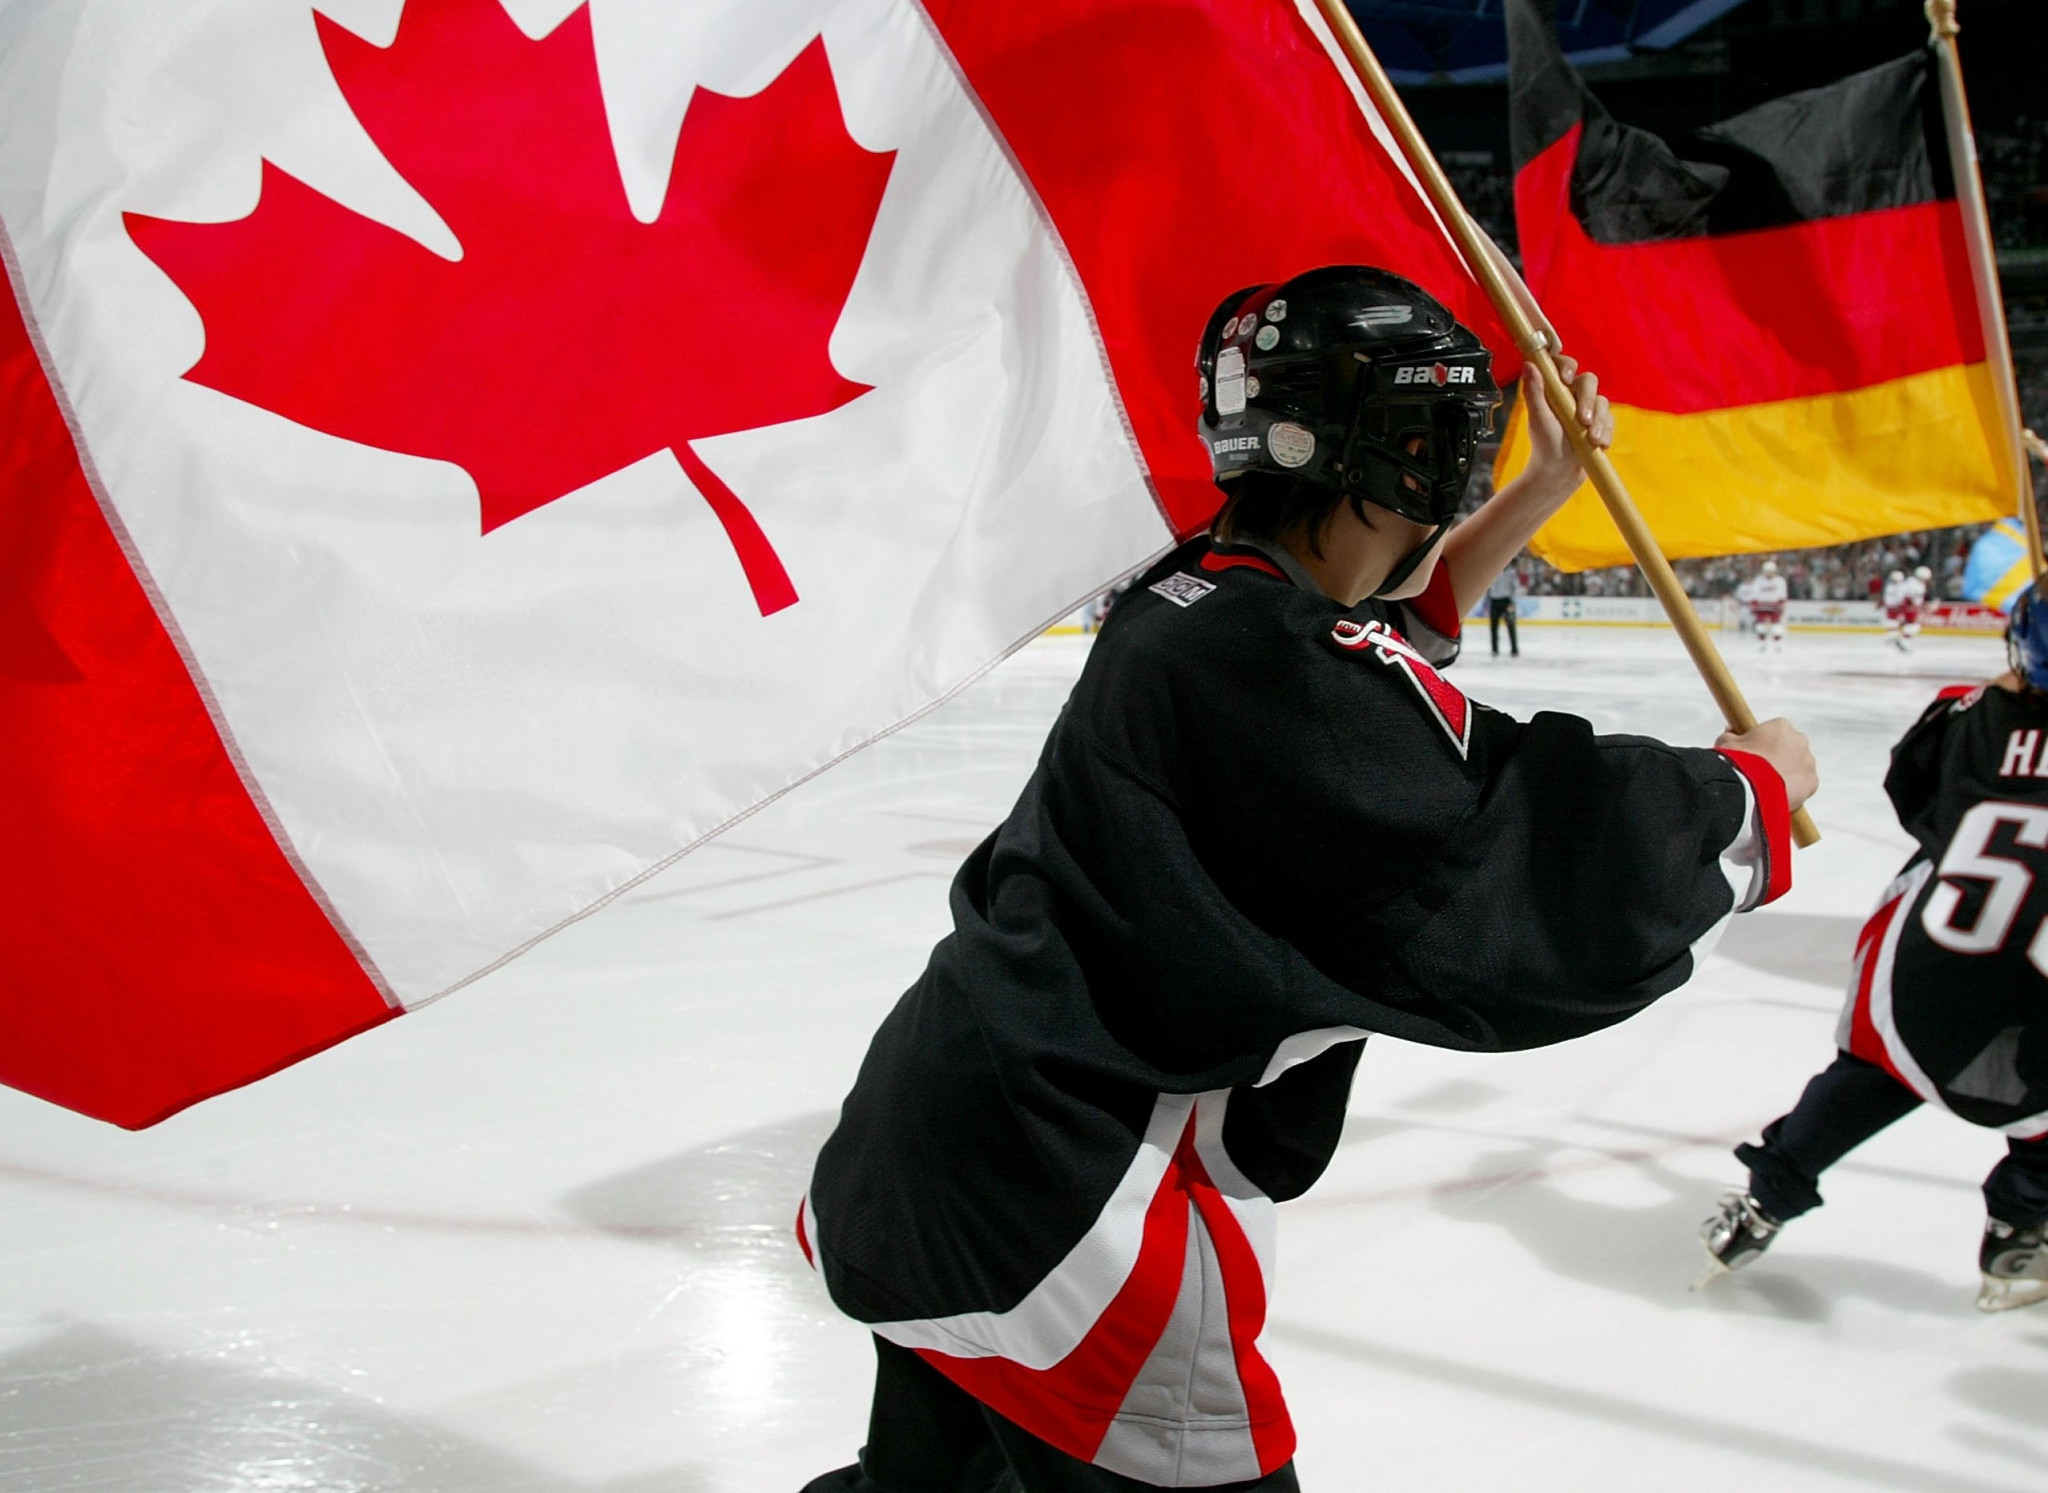 The Hockey Canada Foundation Assist Fund enables children to play ice hockey by reimbursing registration fees ©Getty Images